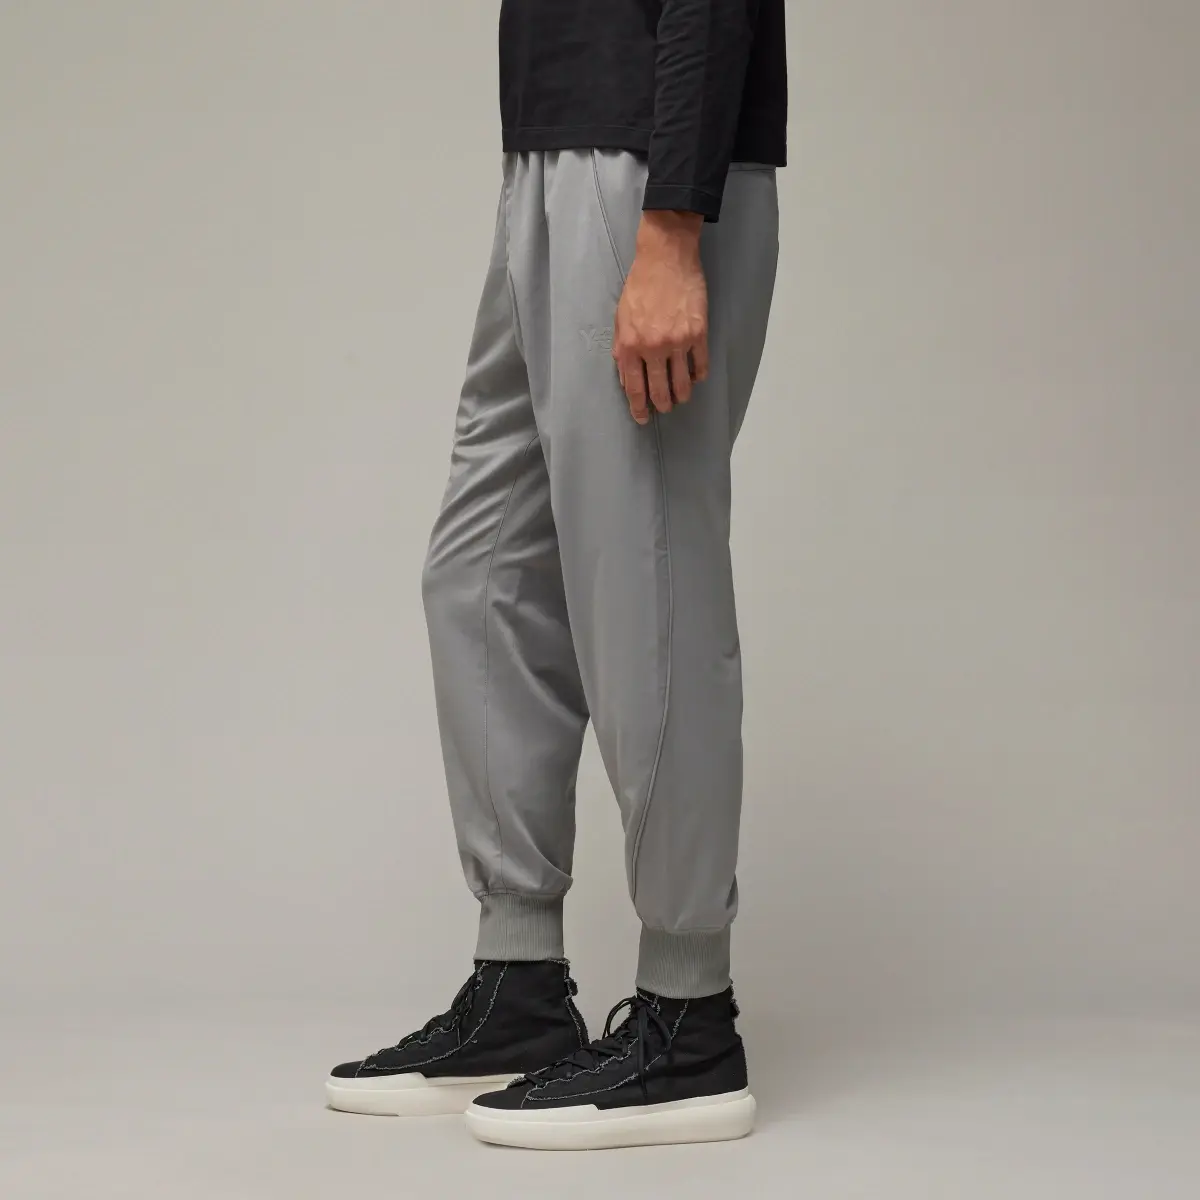 Adidas Y-3 Refined Woven Cuffed Tracksuit Bottoms. 2